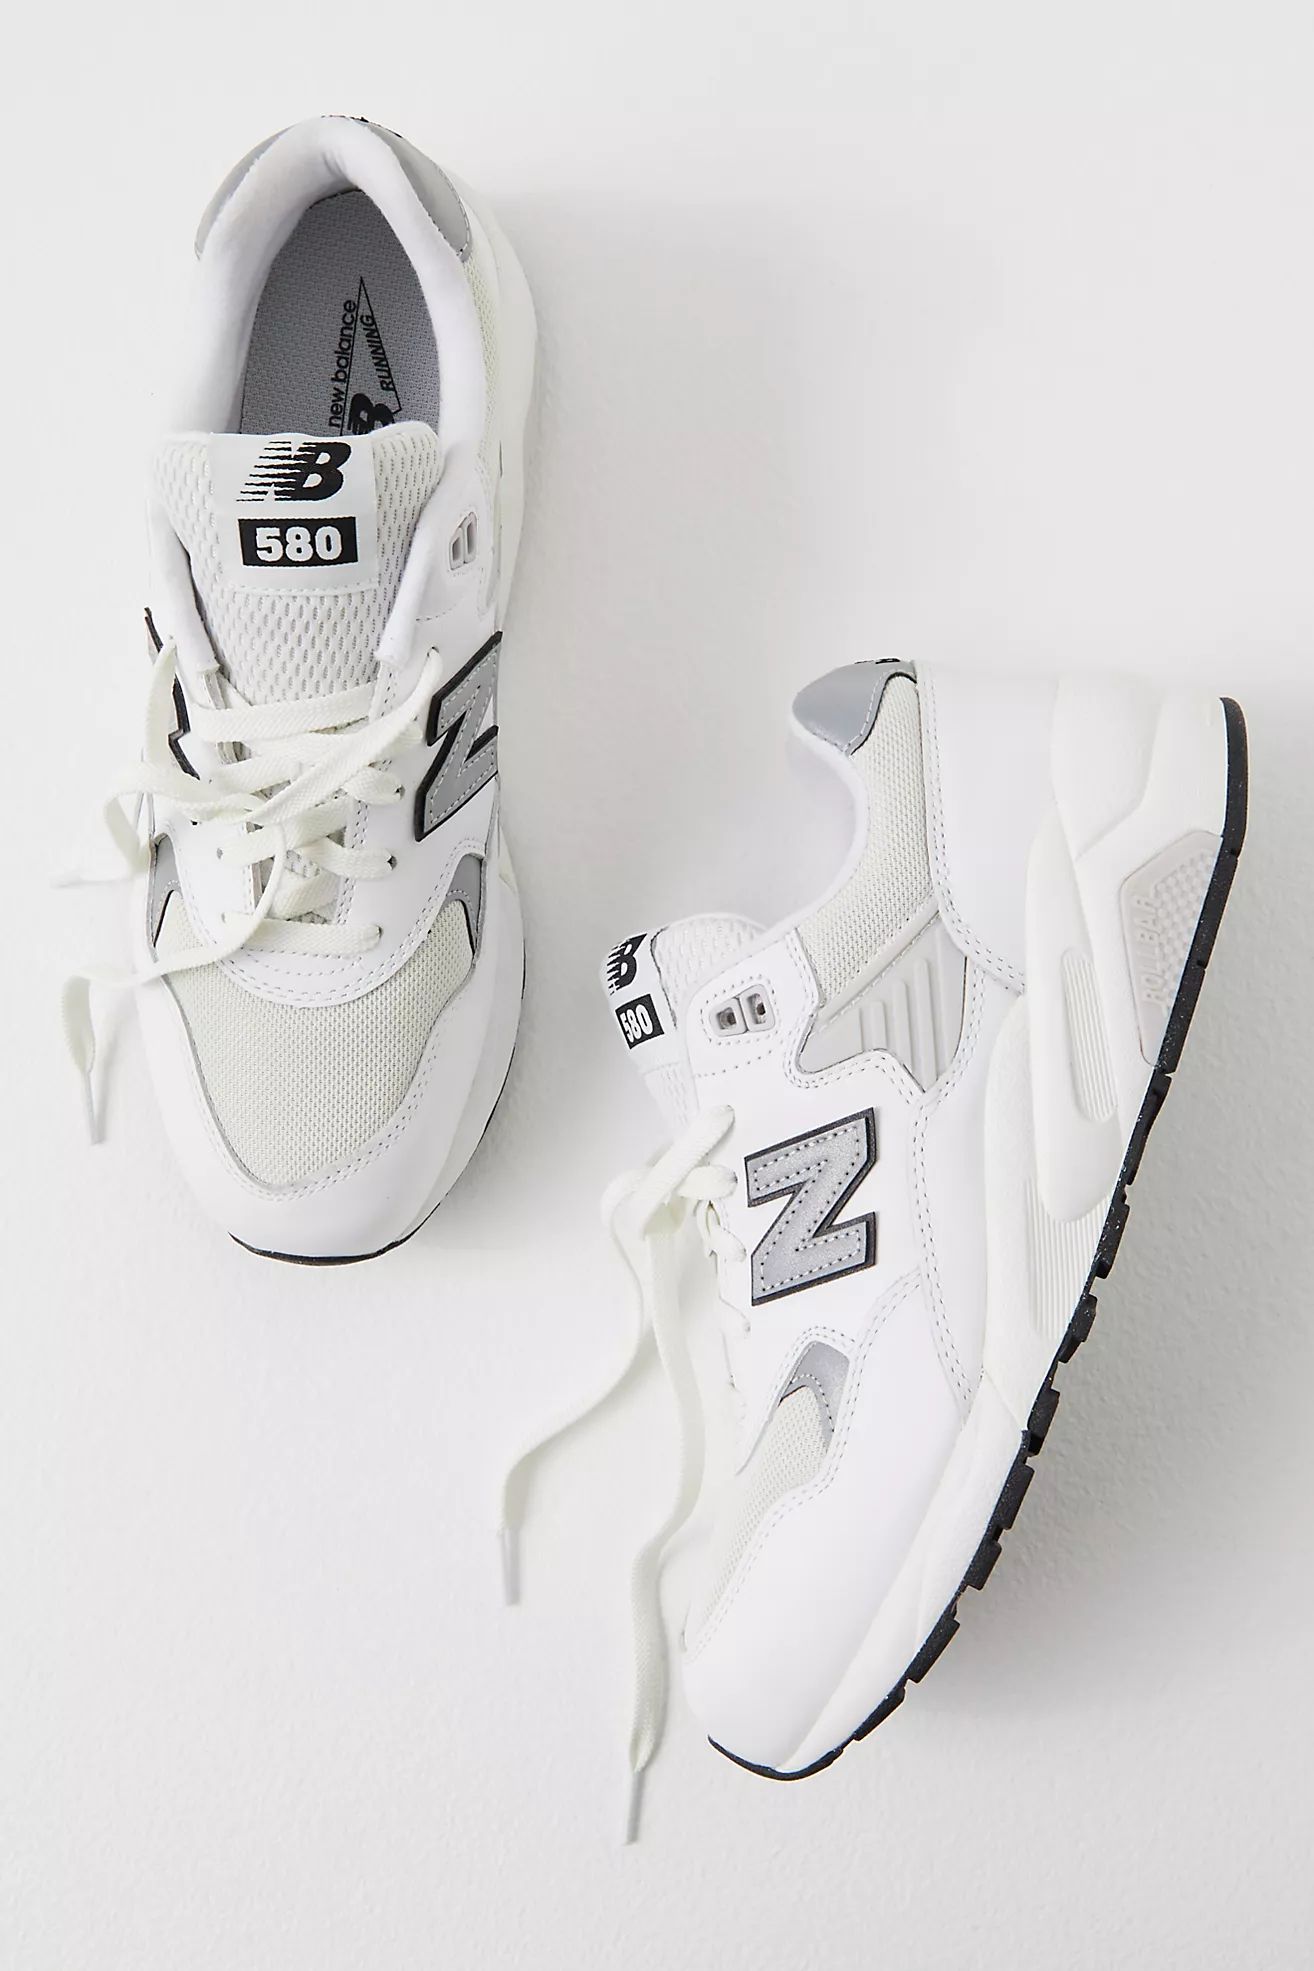 New Balance 580 Sneakers | Free People (Global - UK&FR Excluded)